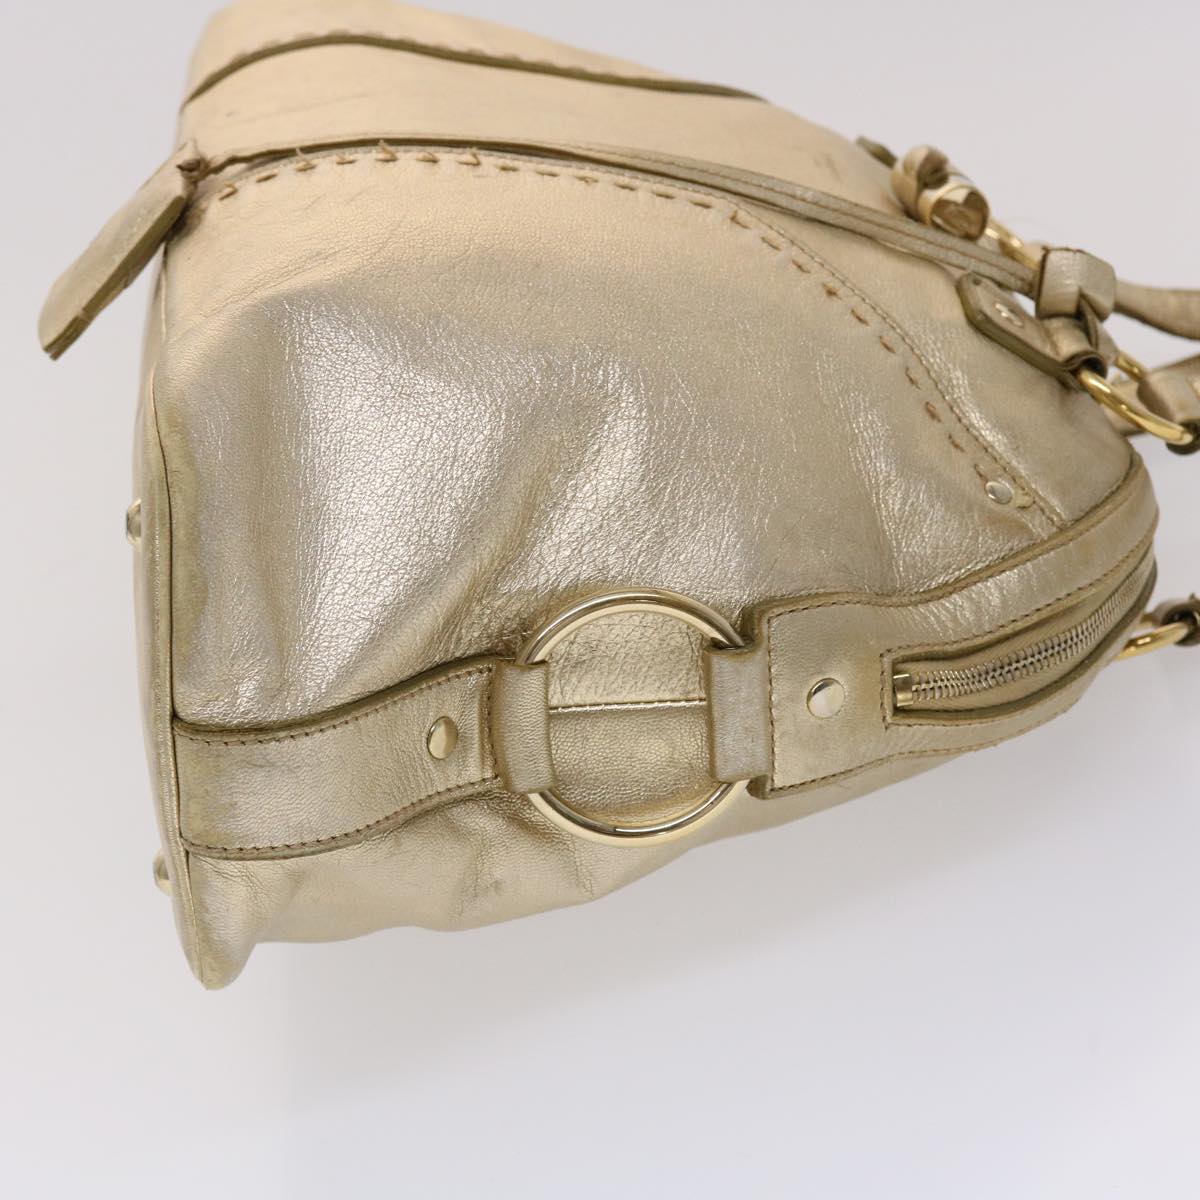 SAINT LAURENT Muse Hand Bag Leather Gold Tone 002122 Auth yk7591